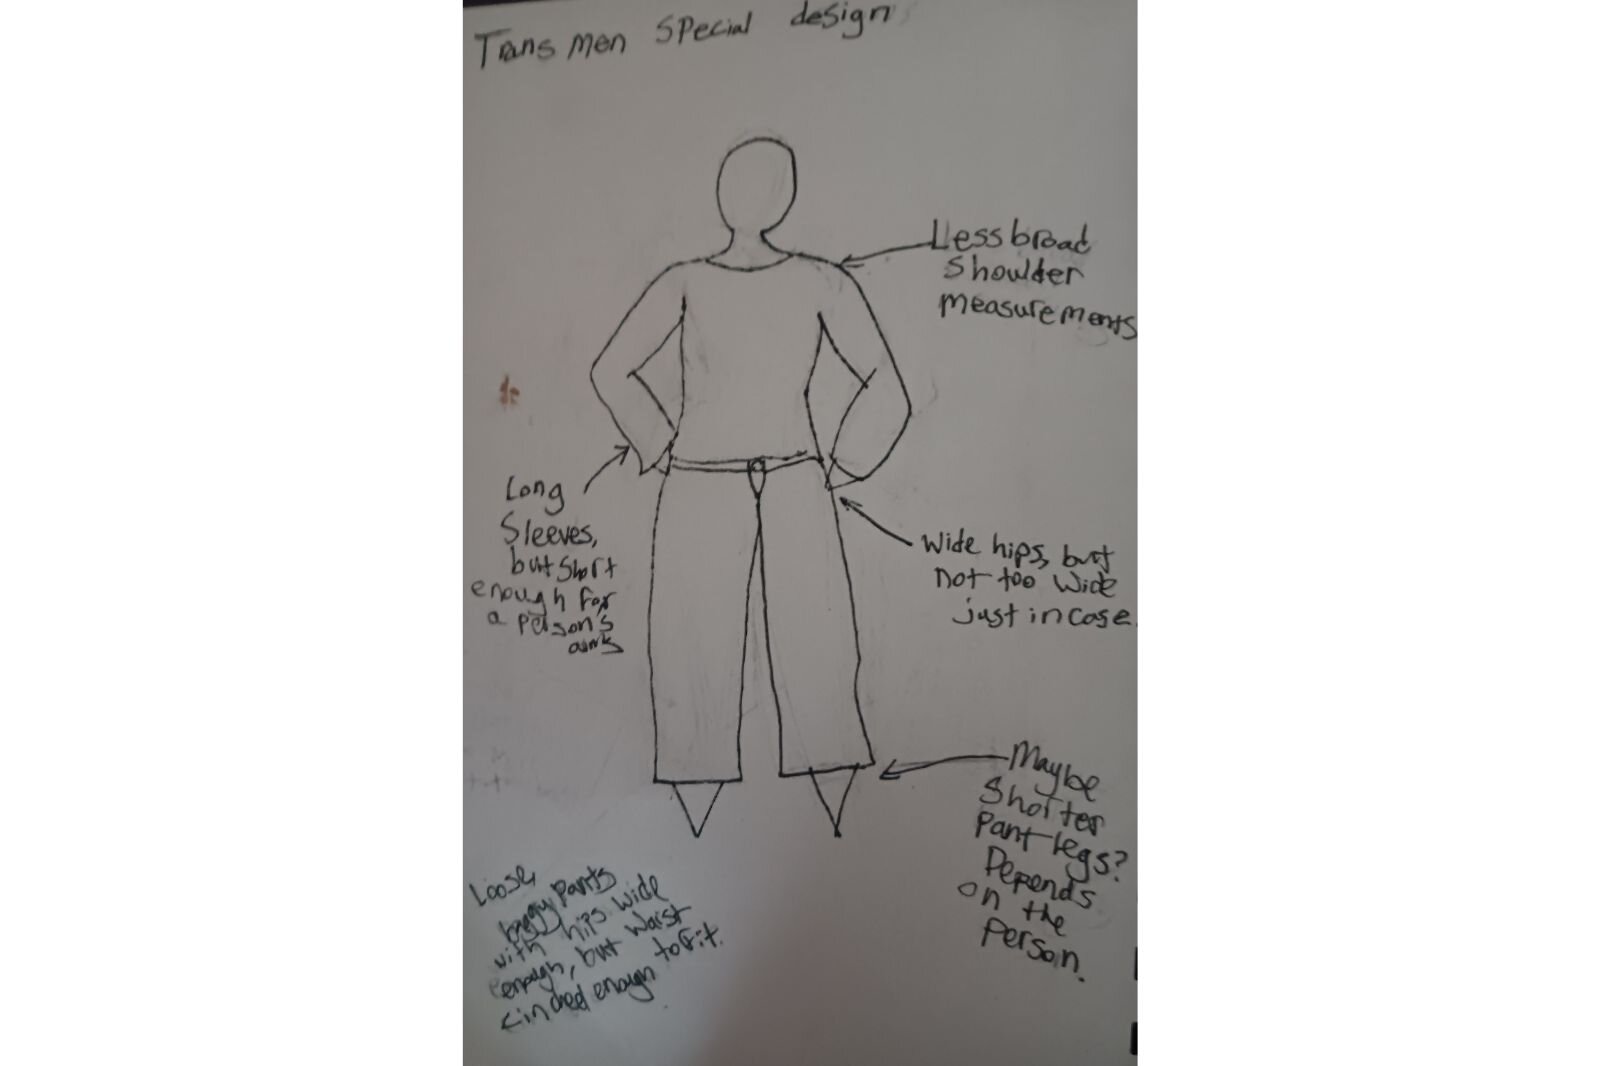 This trans man dress was designed by Lila McCarthy to fit different body types.